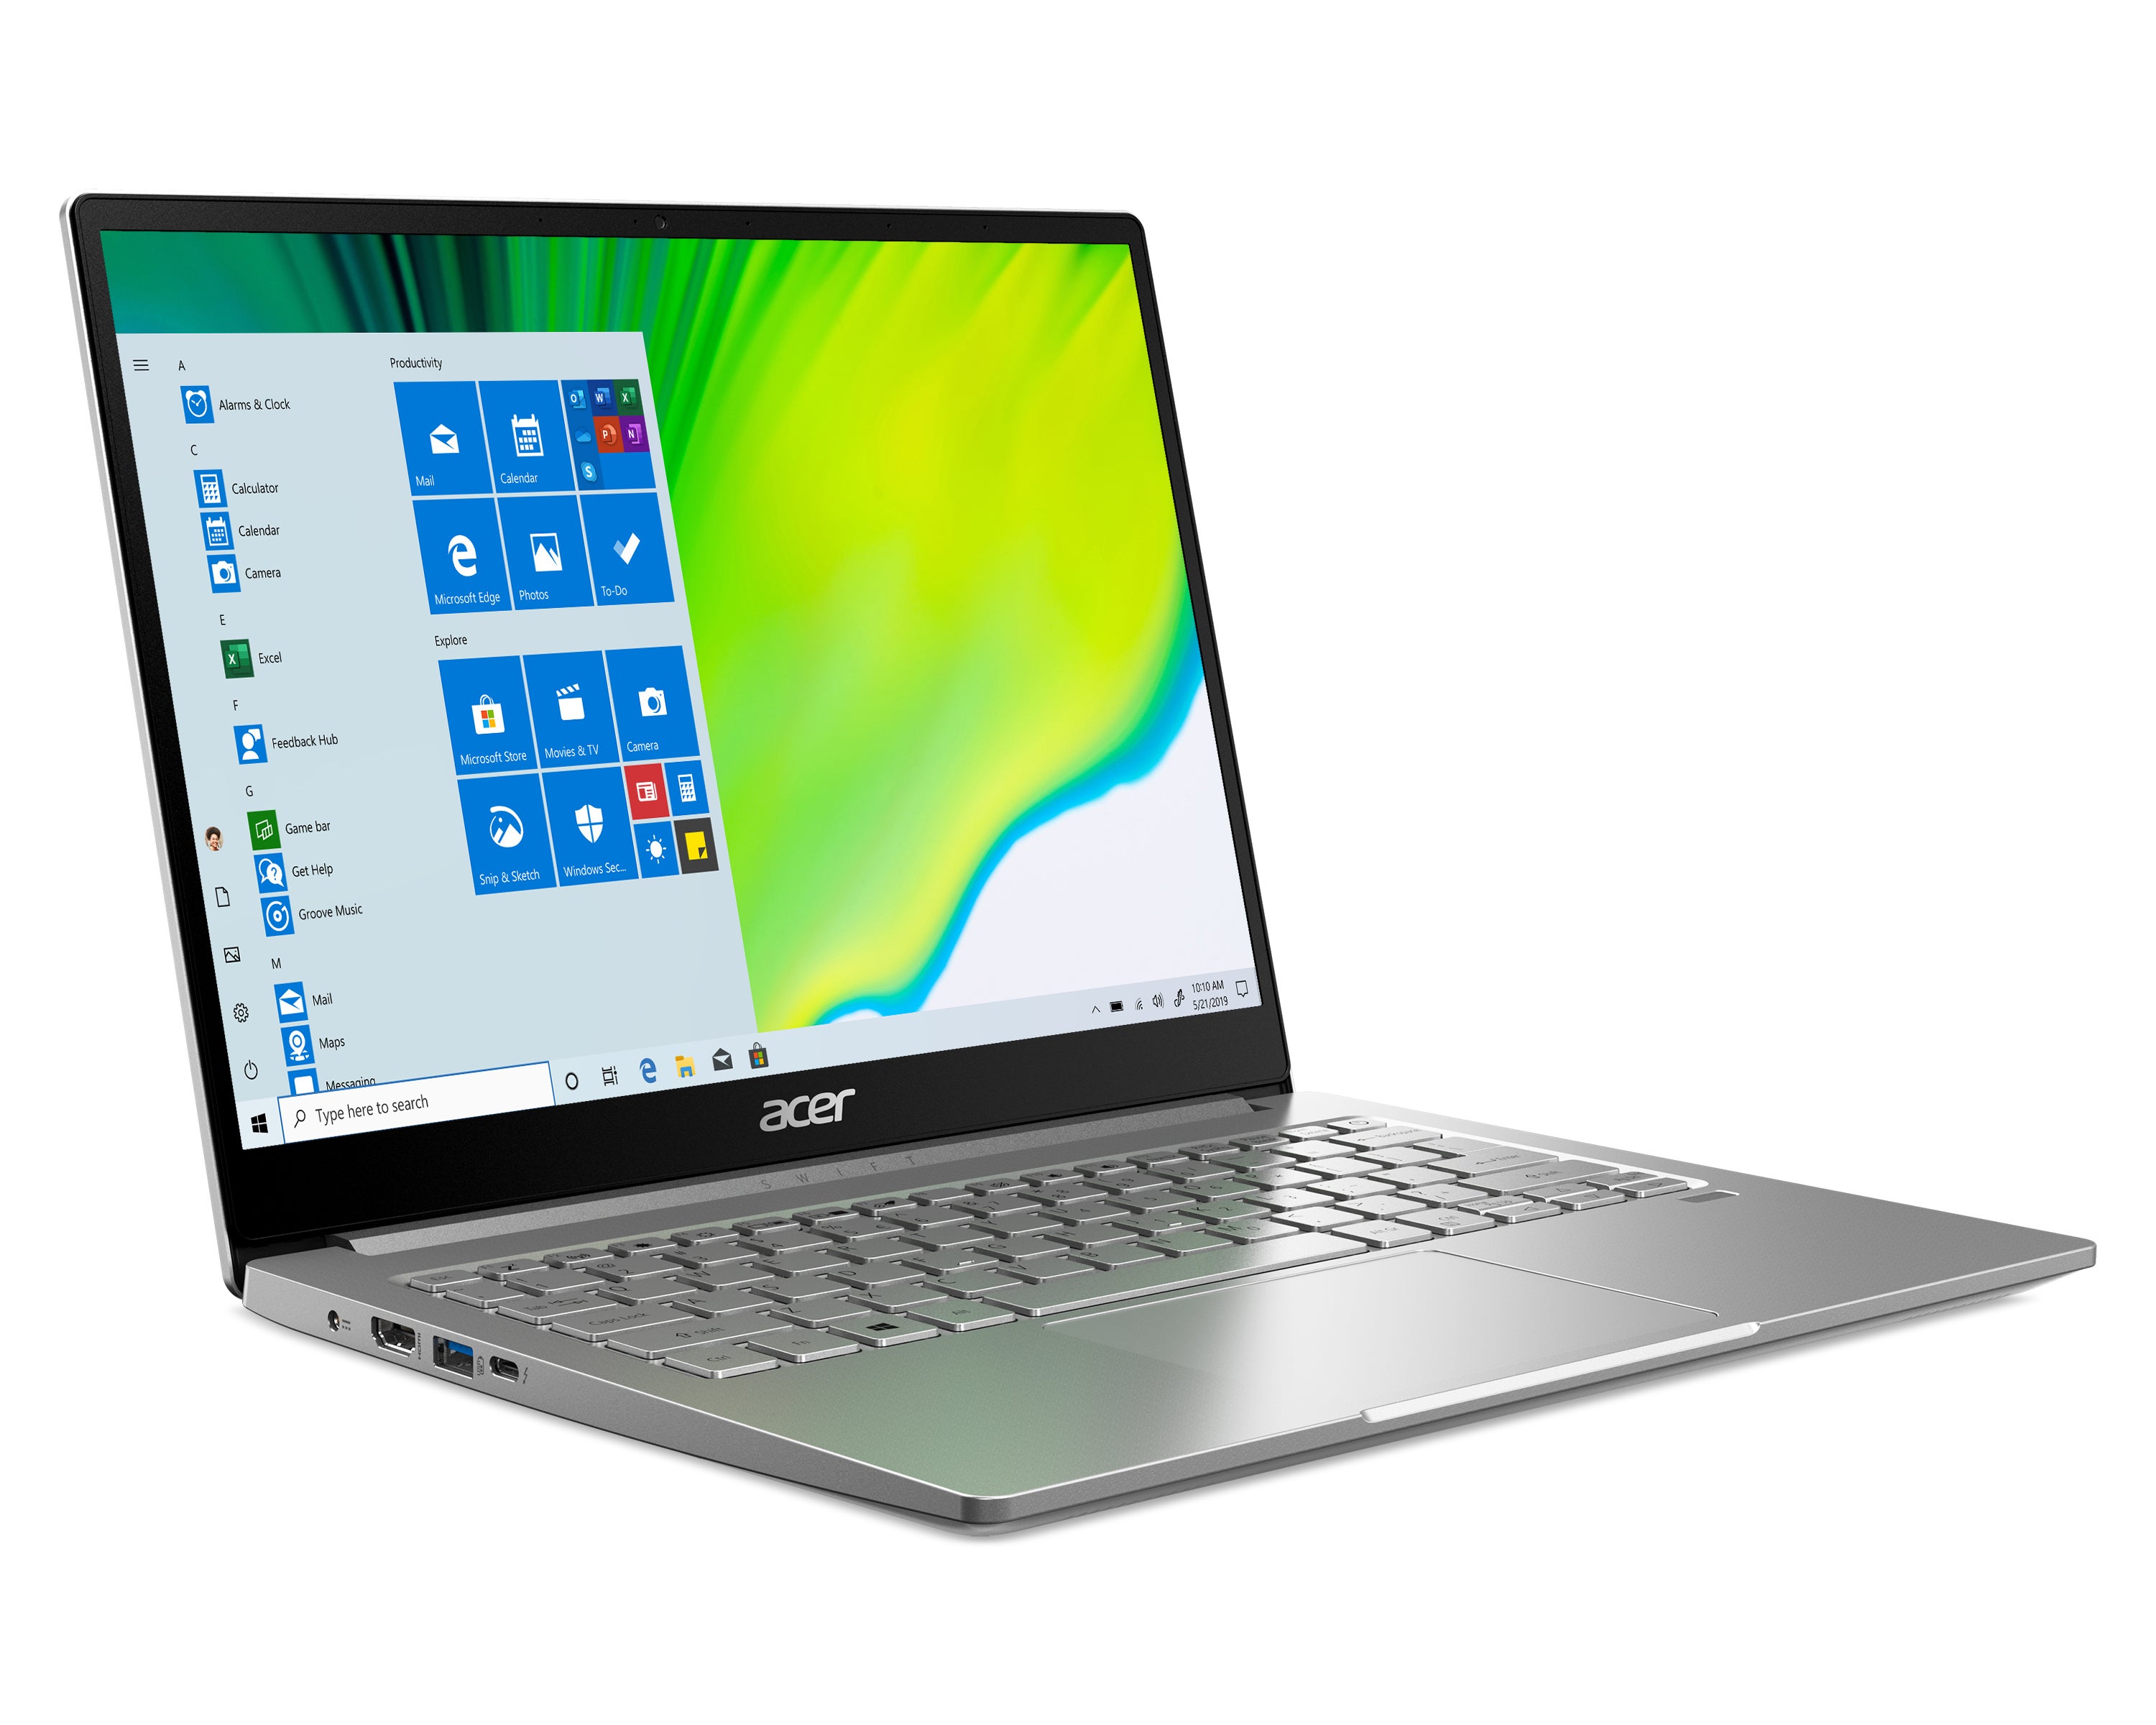  A silver Acer Swift Series laptop with narrow bezels and a backlit keyboard.